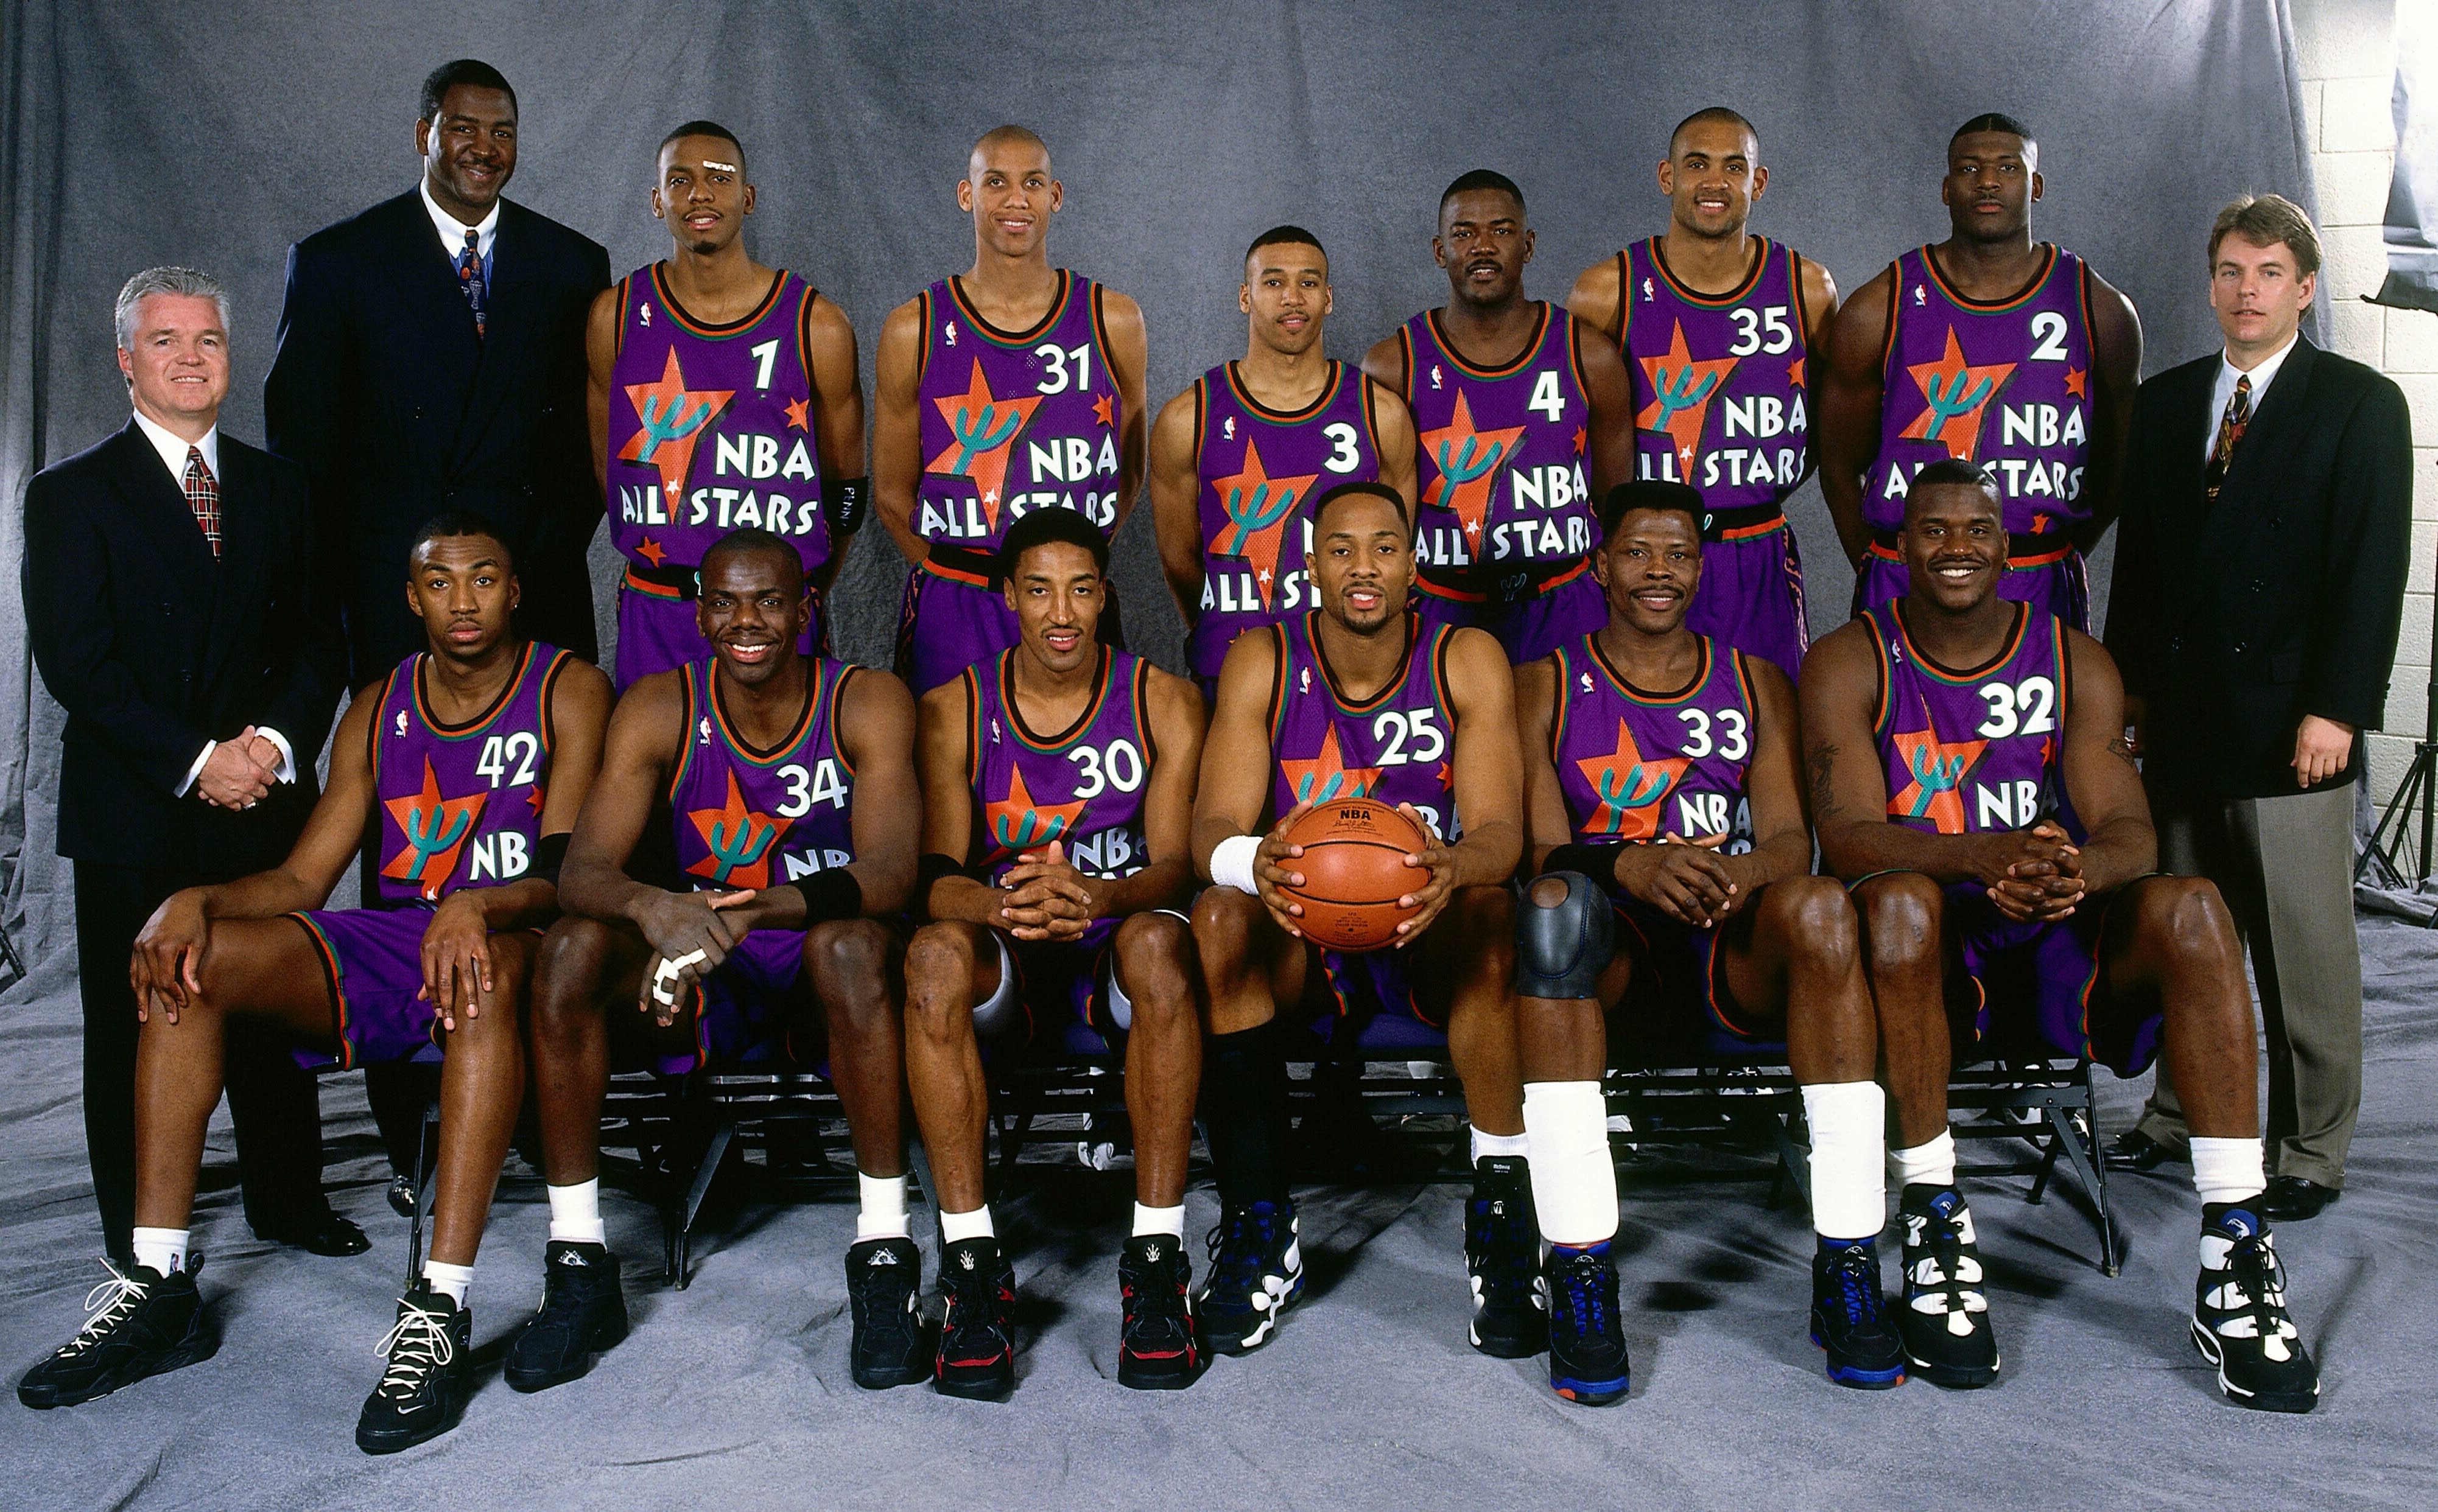 all star game 1997